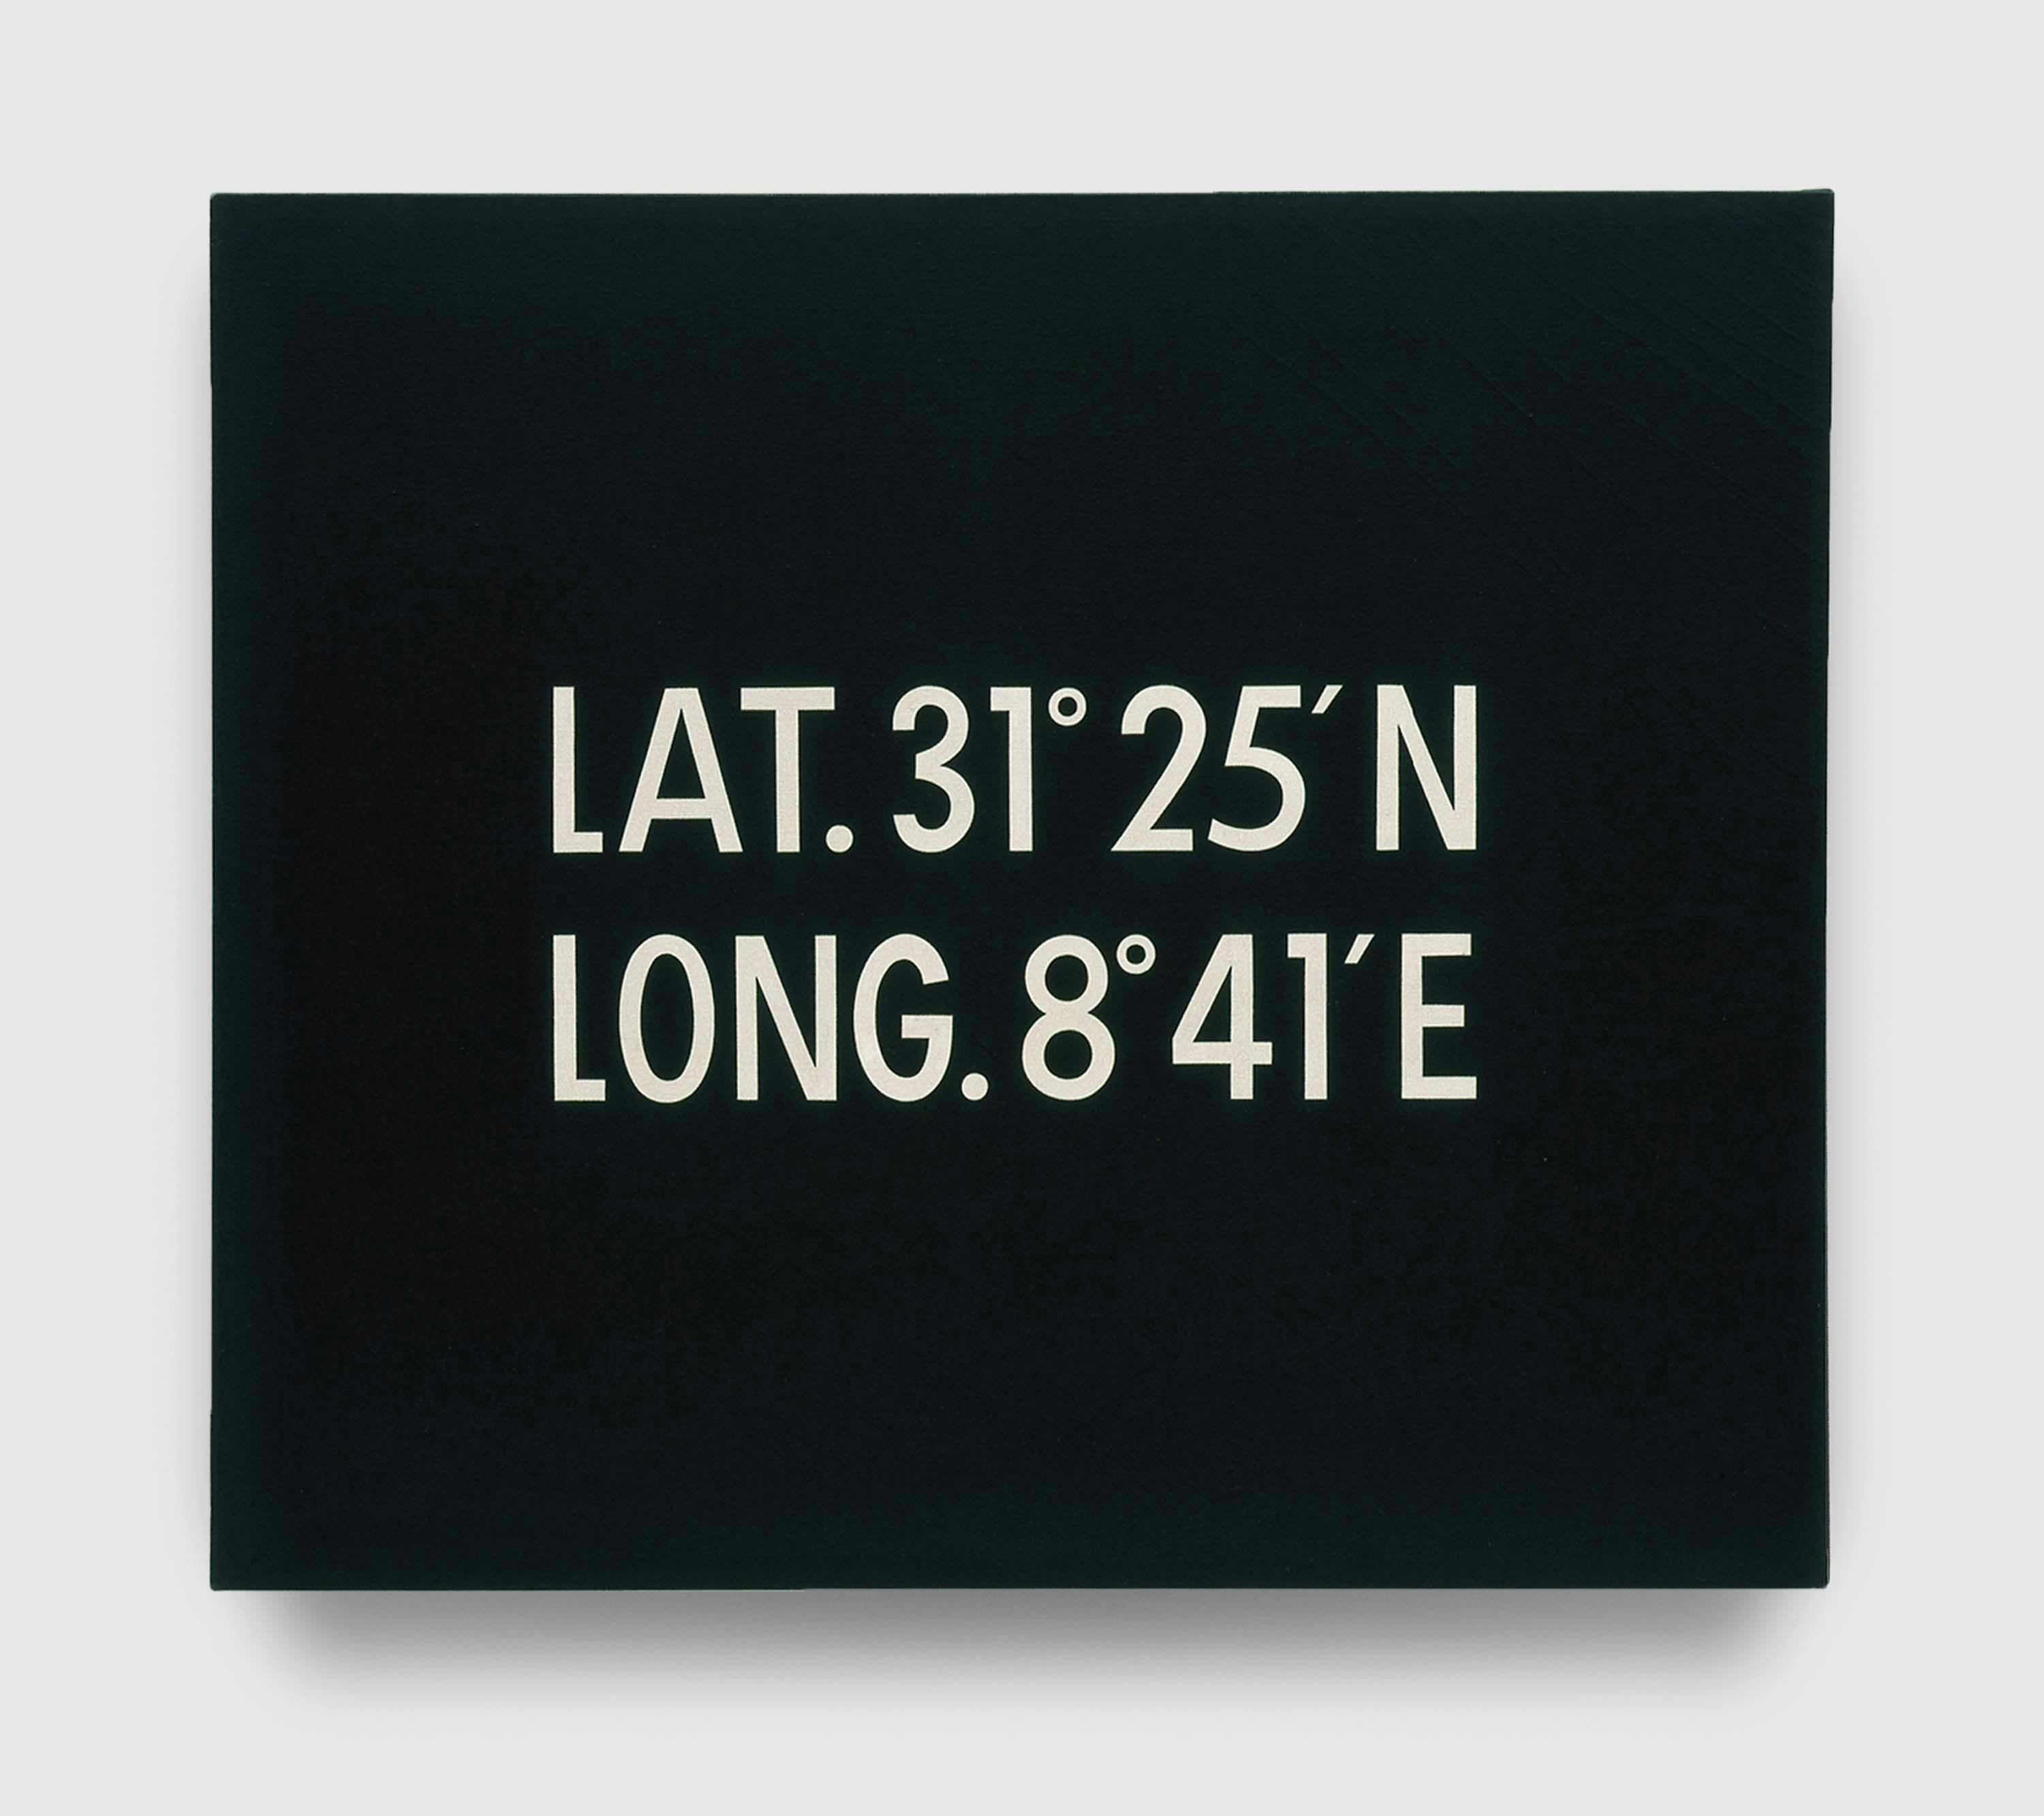 A painting by On Kawara, titled LAT. 31¬∞ 25'N LONG. 8¬∞ 41'E, dated 1965.